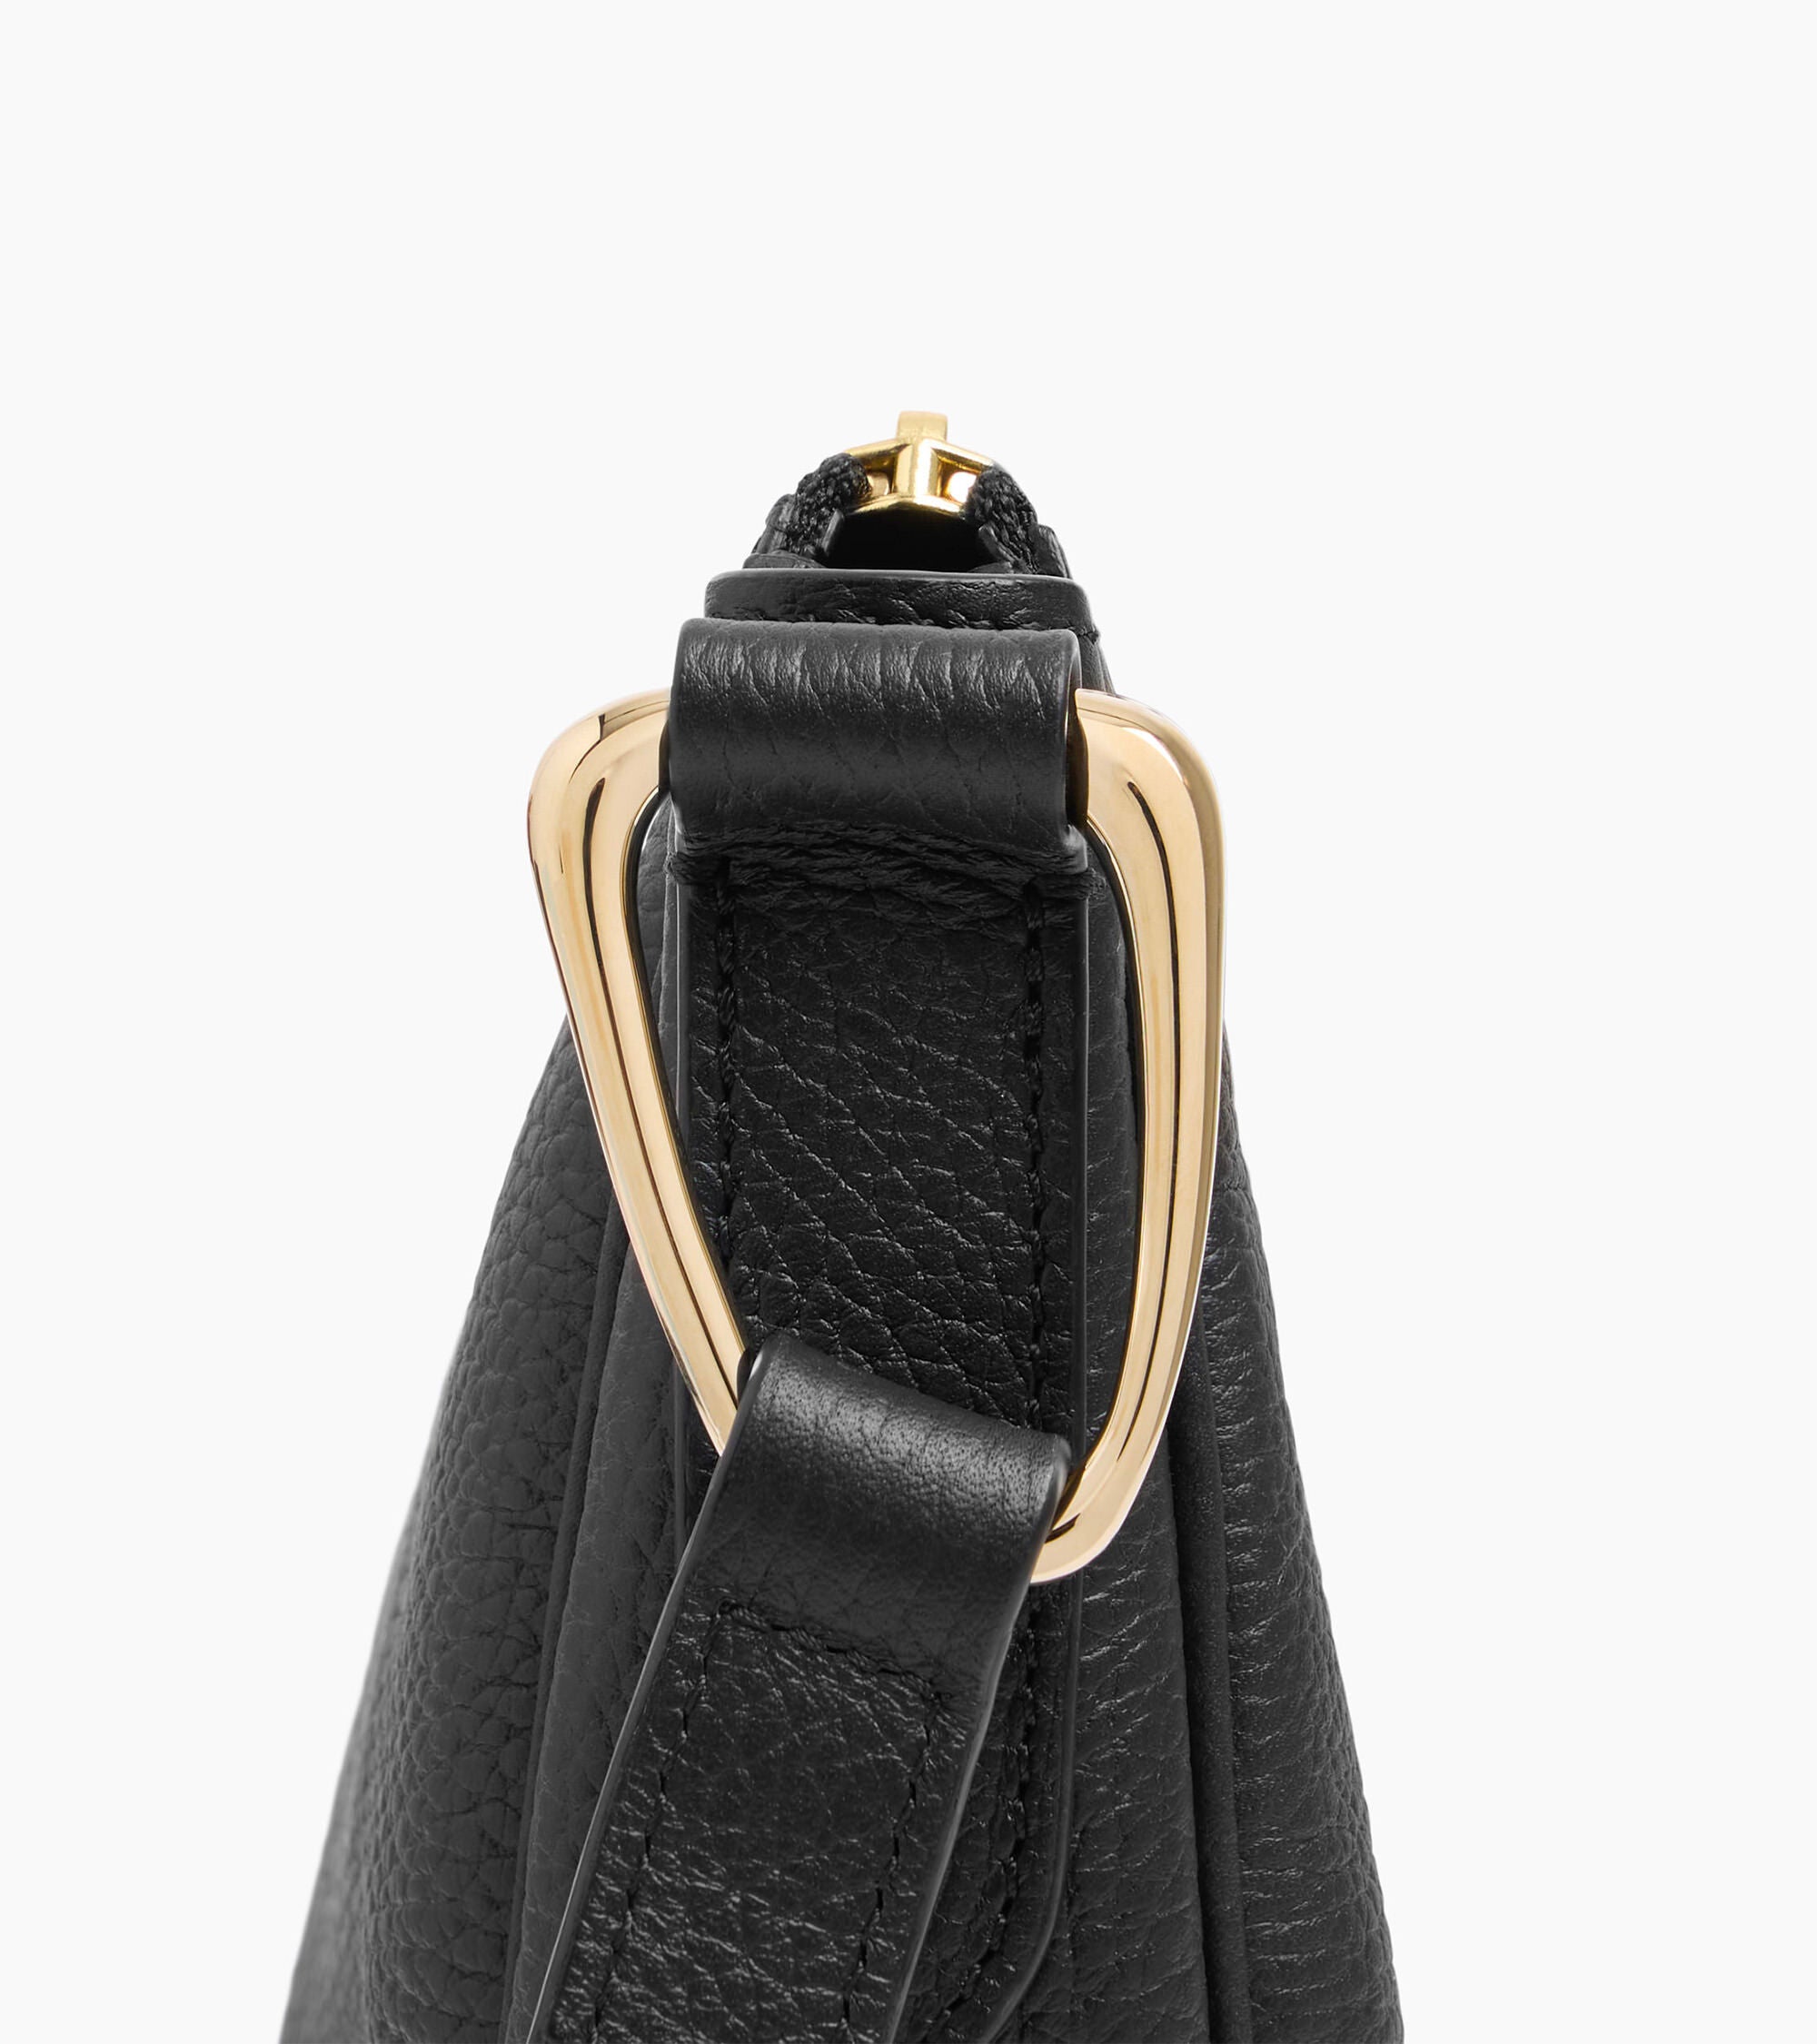 Madeleine grained leather baguette bag